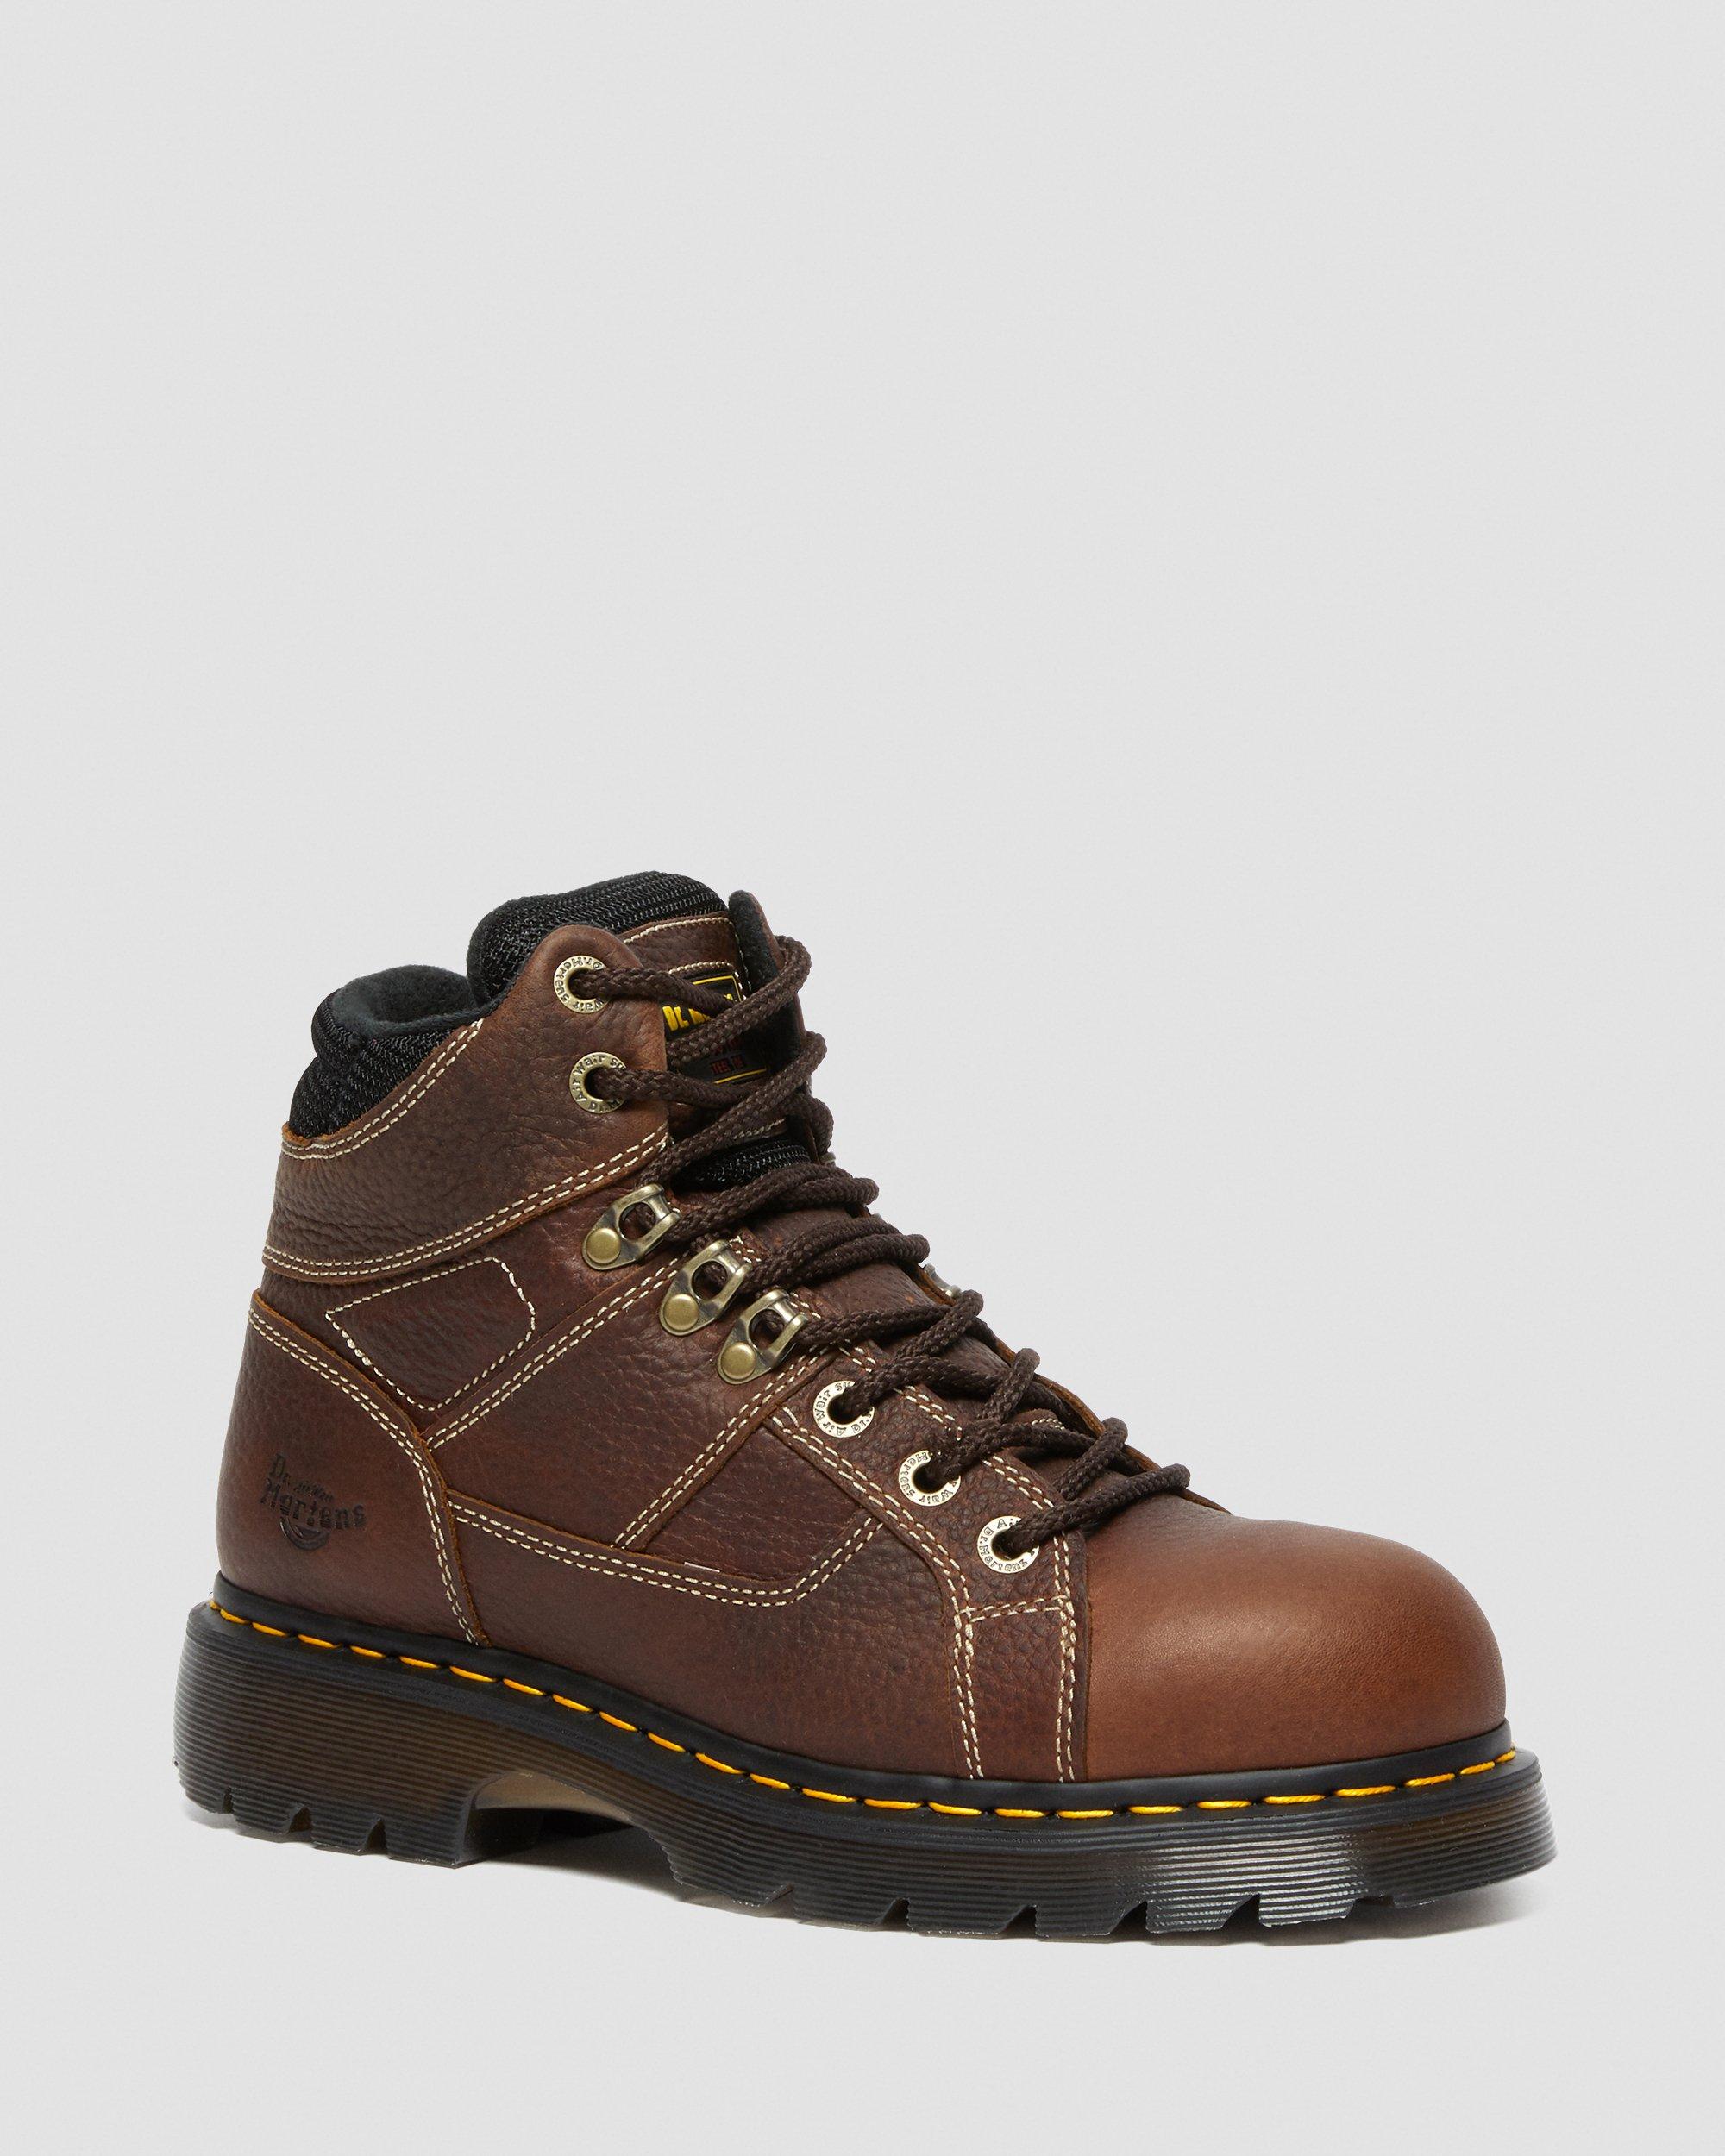 leather work boots steel toe